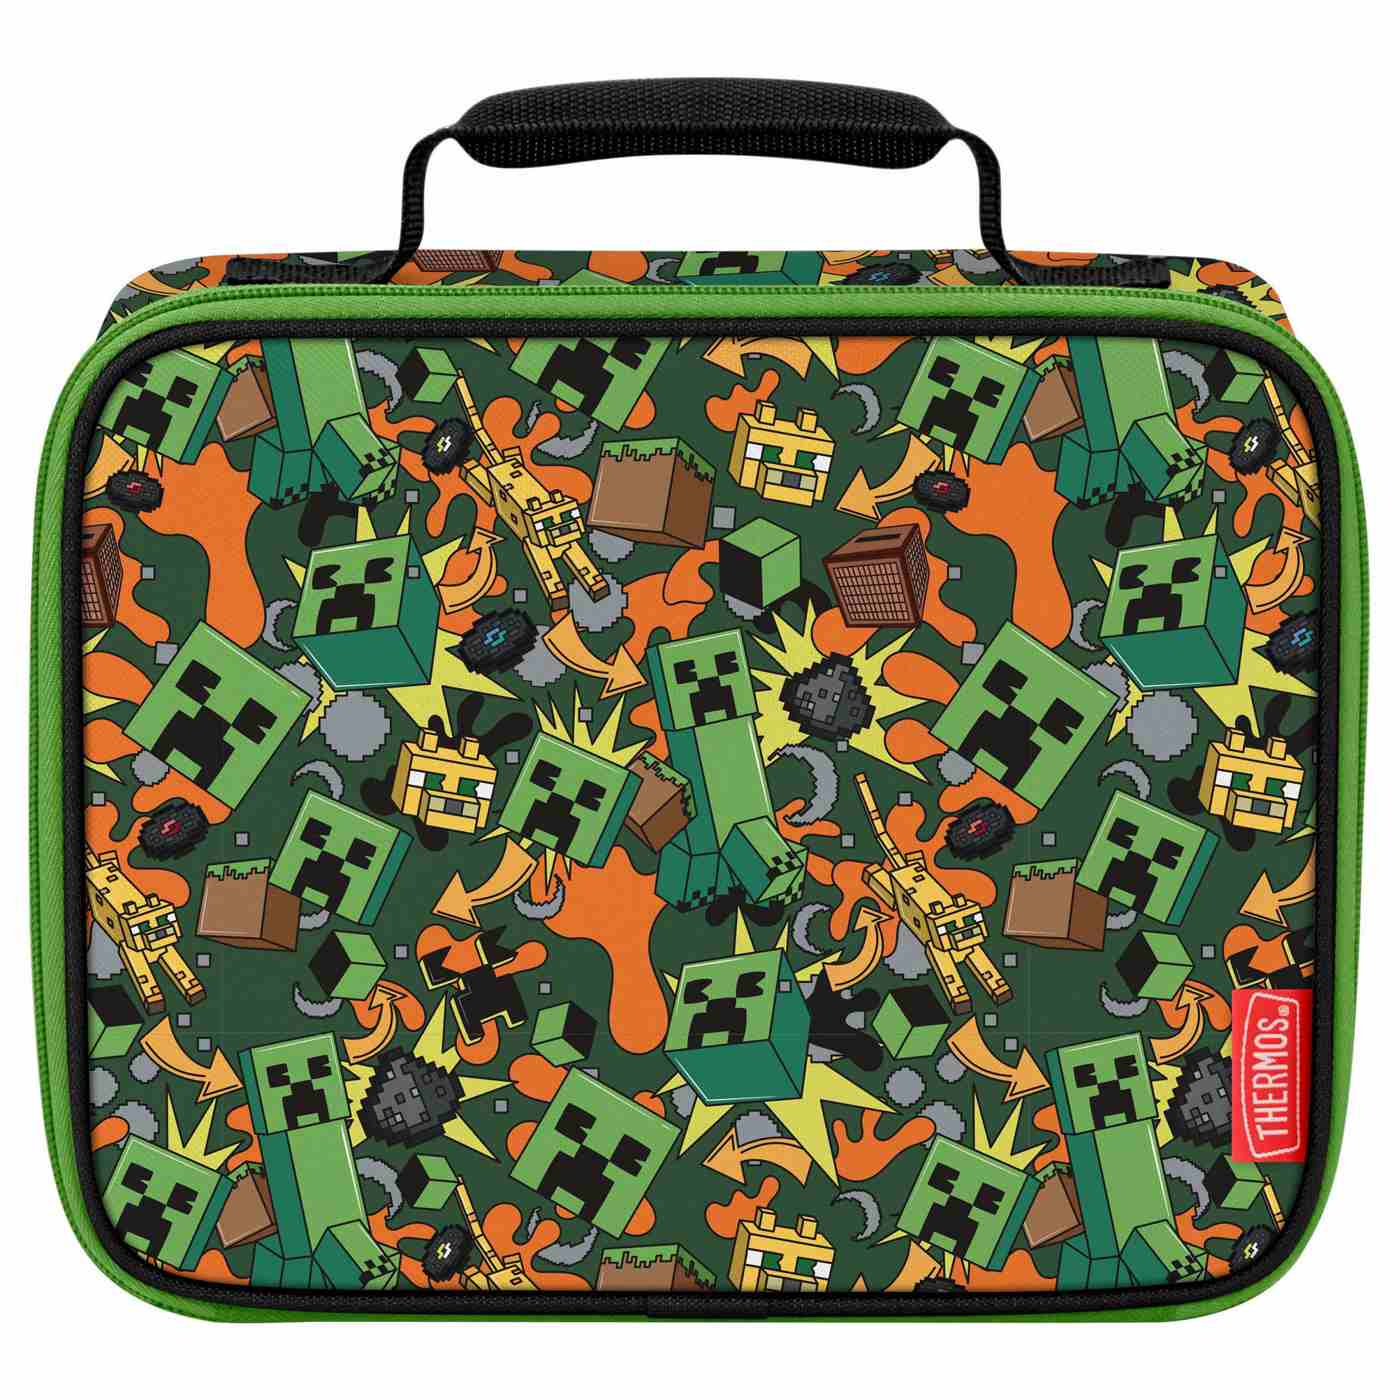 Thermos Kids Soft Lunch Box - Minecraft; image 1 of 2